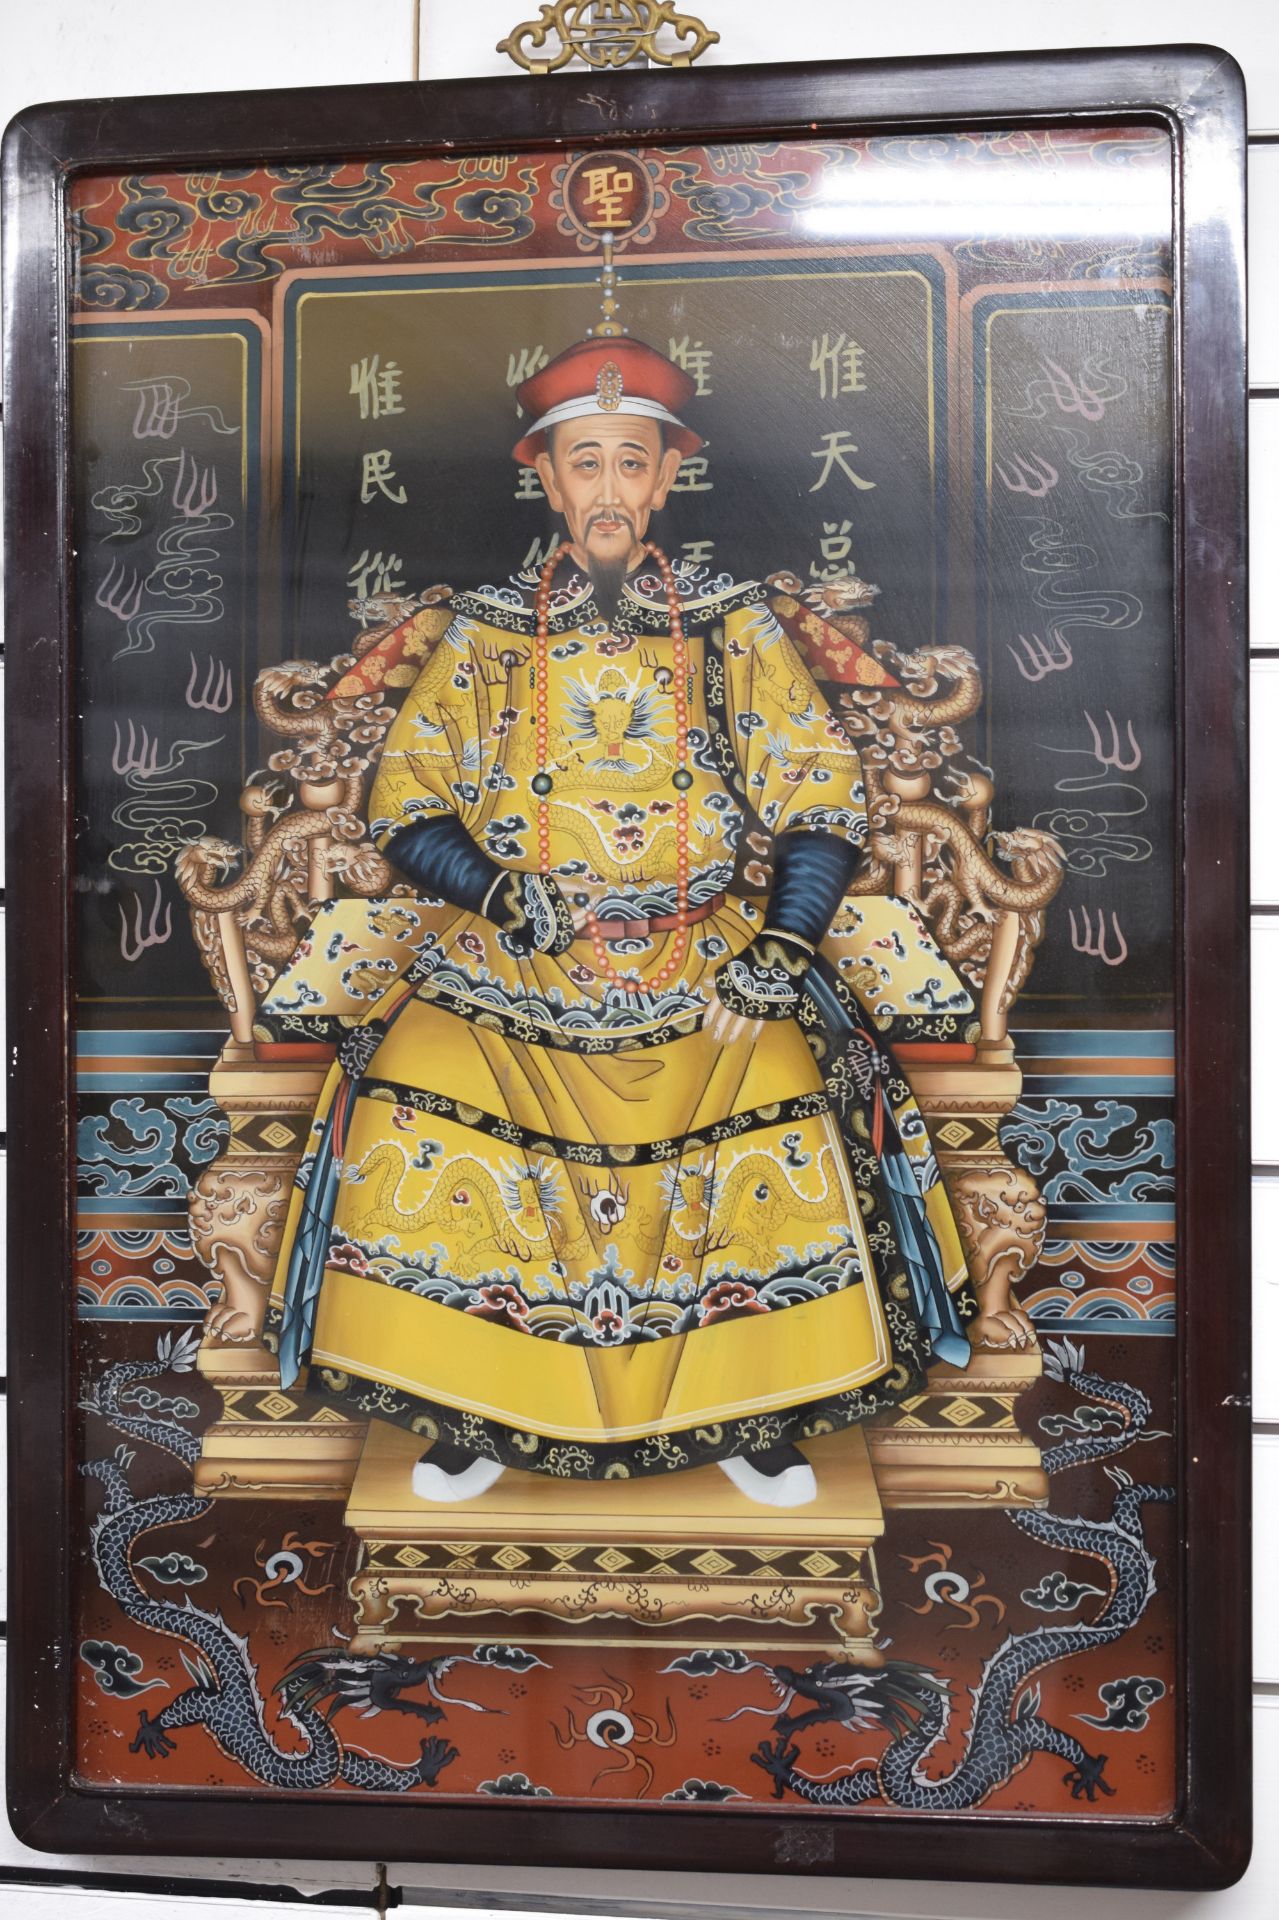 Vintage Chinese Reverse Oil On Glass Portraits Of The First Emperor & Empress Of China - Image 2 of 4